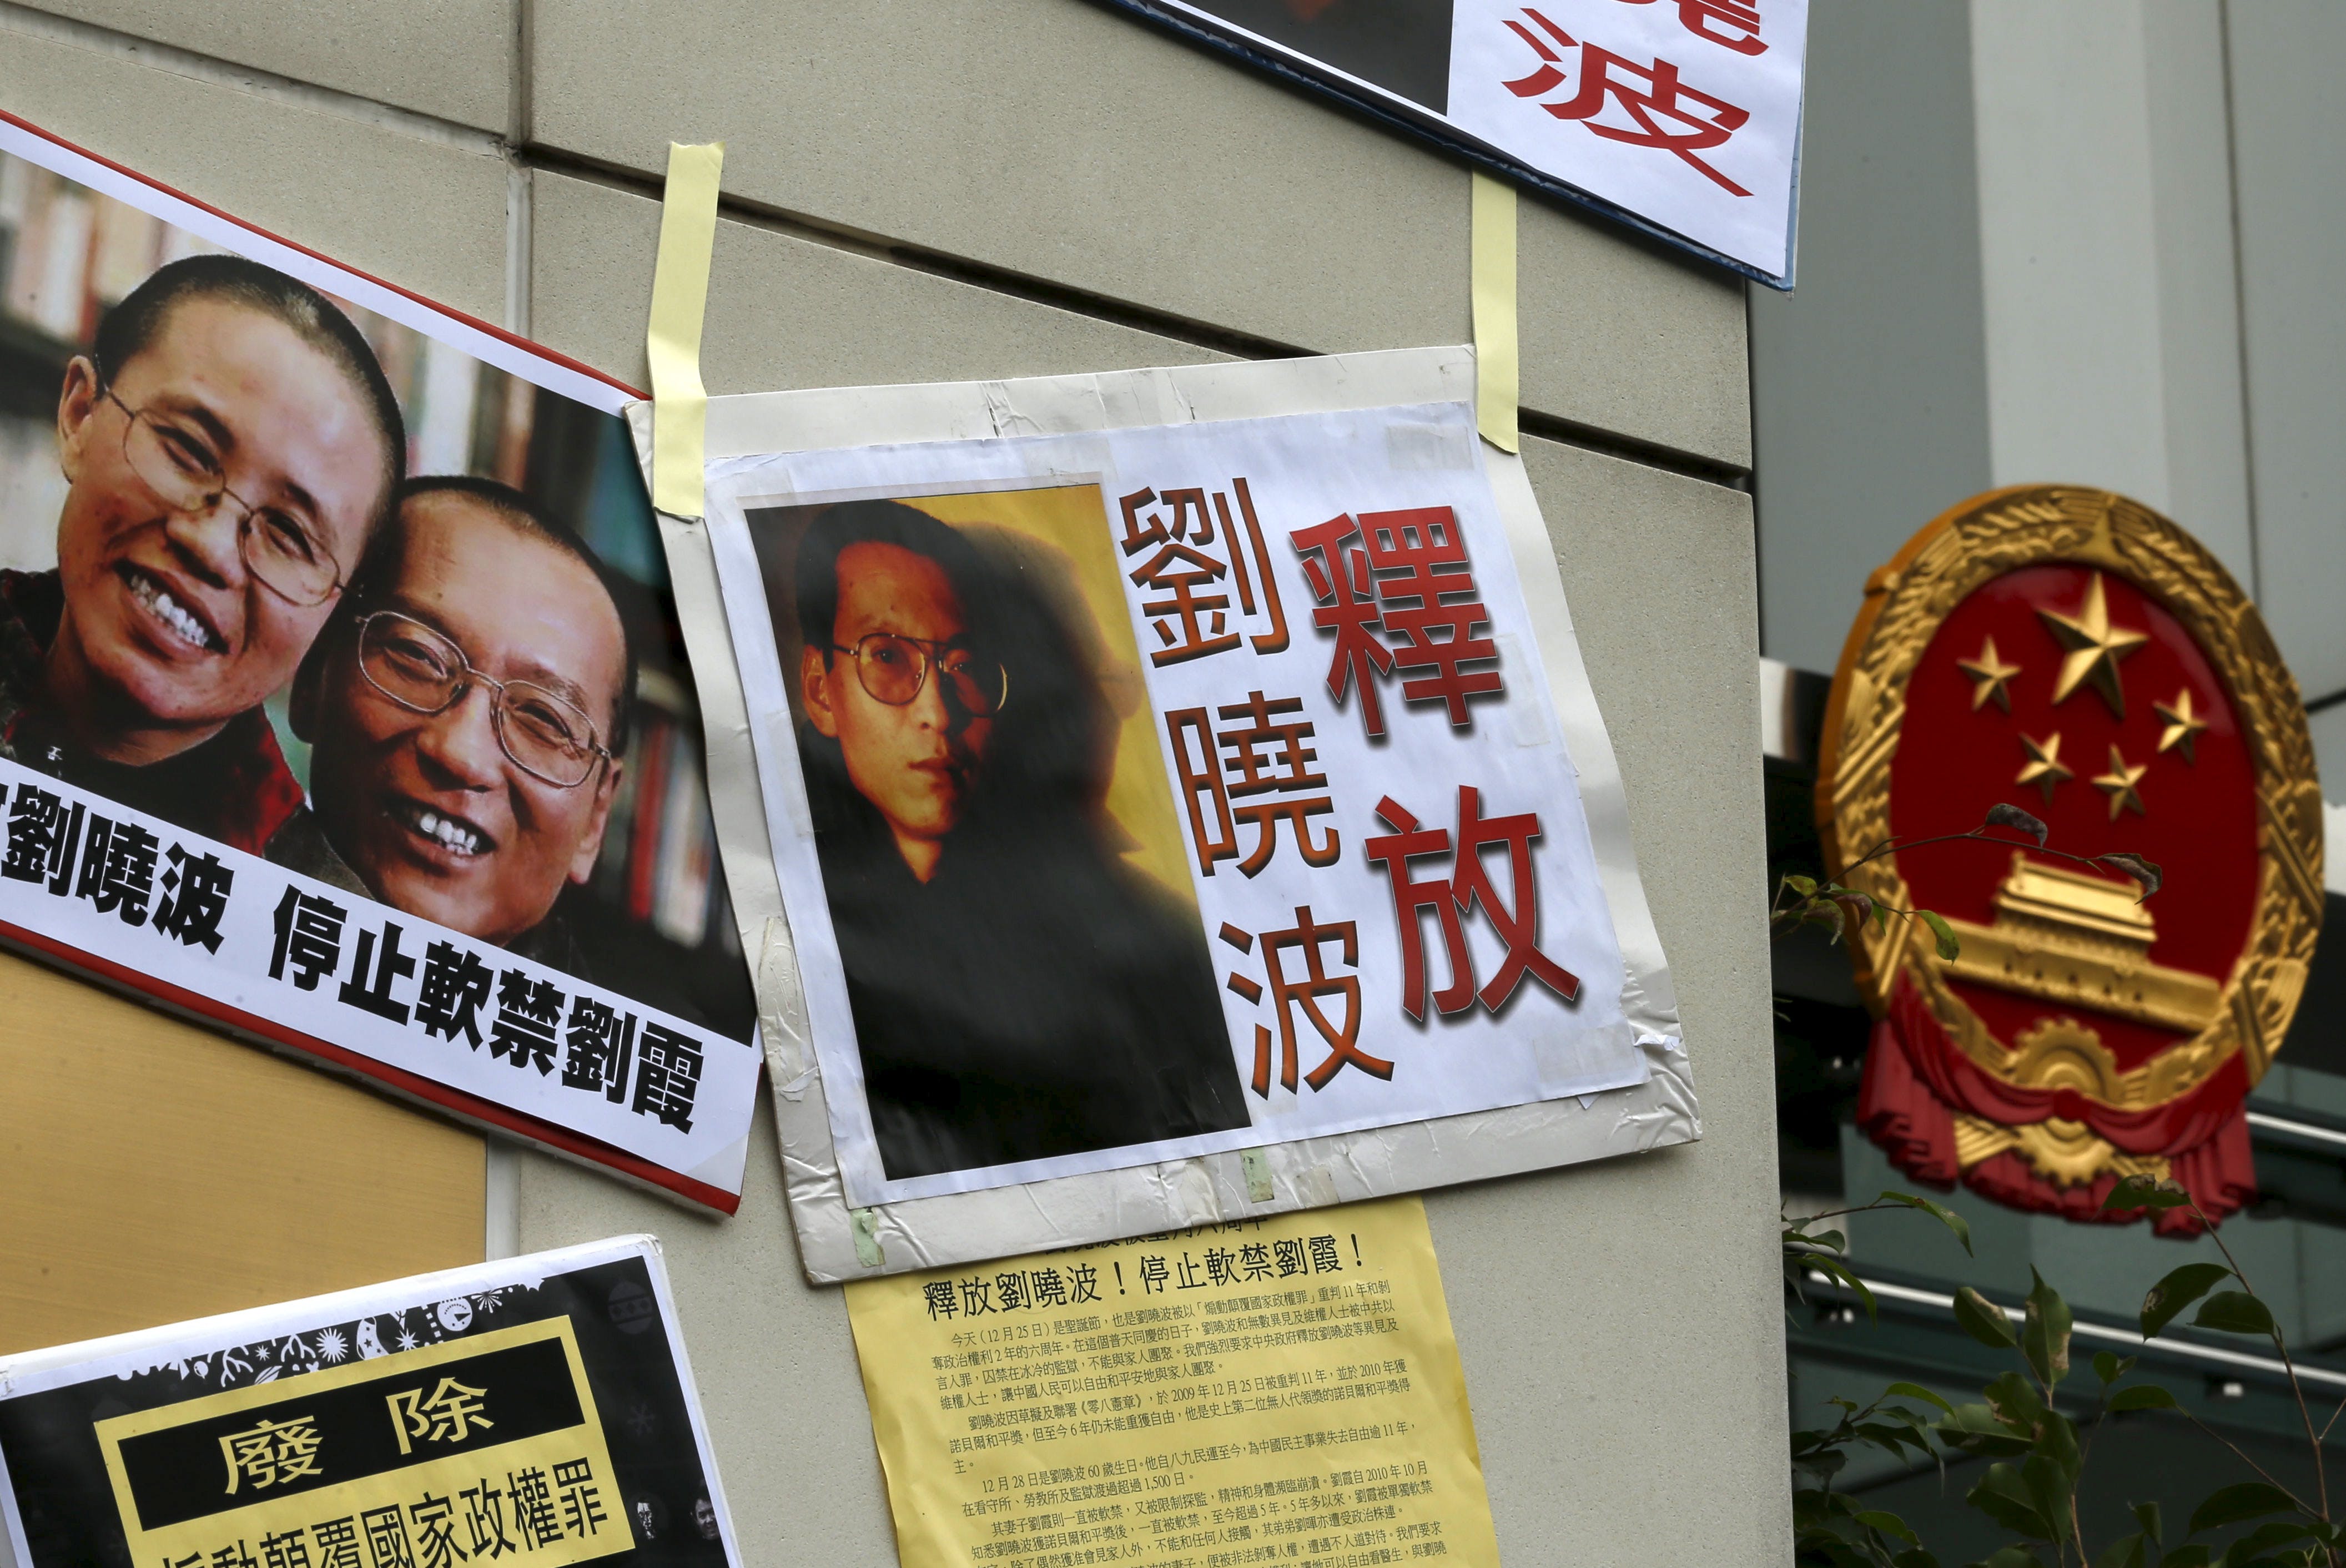 Signs and portraits of jailed Chinese Nobel Peace Prize laureate Liu Xiaobo and his wife Liu Xia are seen in front of the national emblem of China during a protest outside the Chinese liaison office i